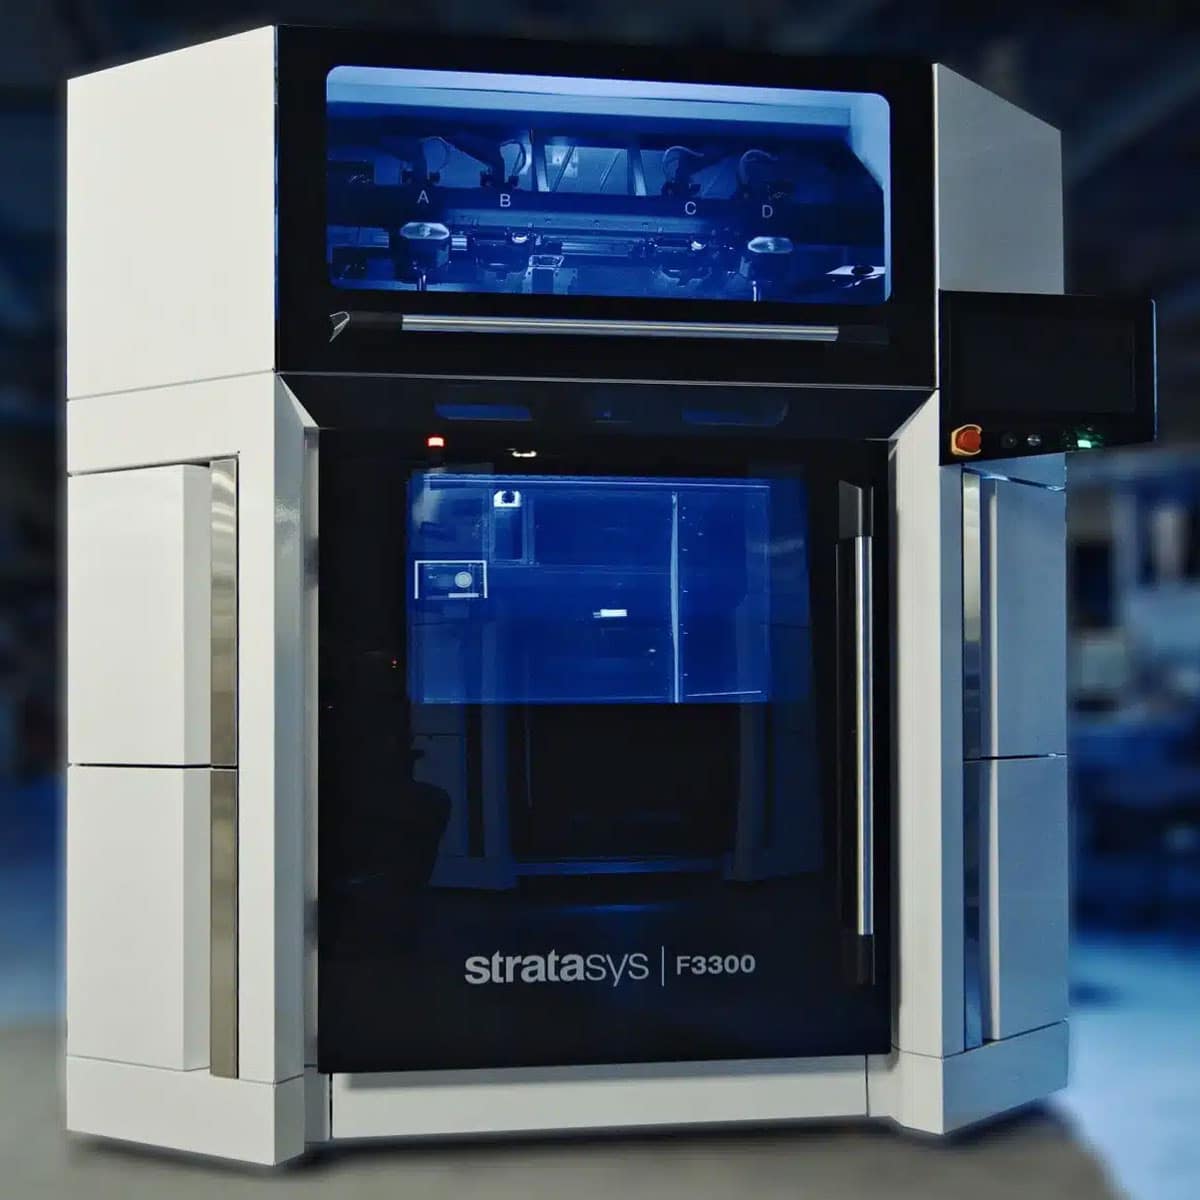 PADT's New Stratasys F3300 FDM Additive Manufacturing System